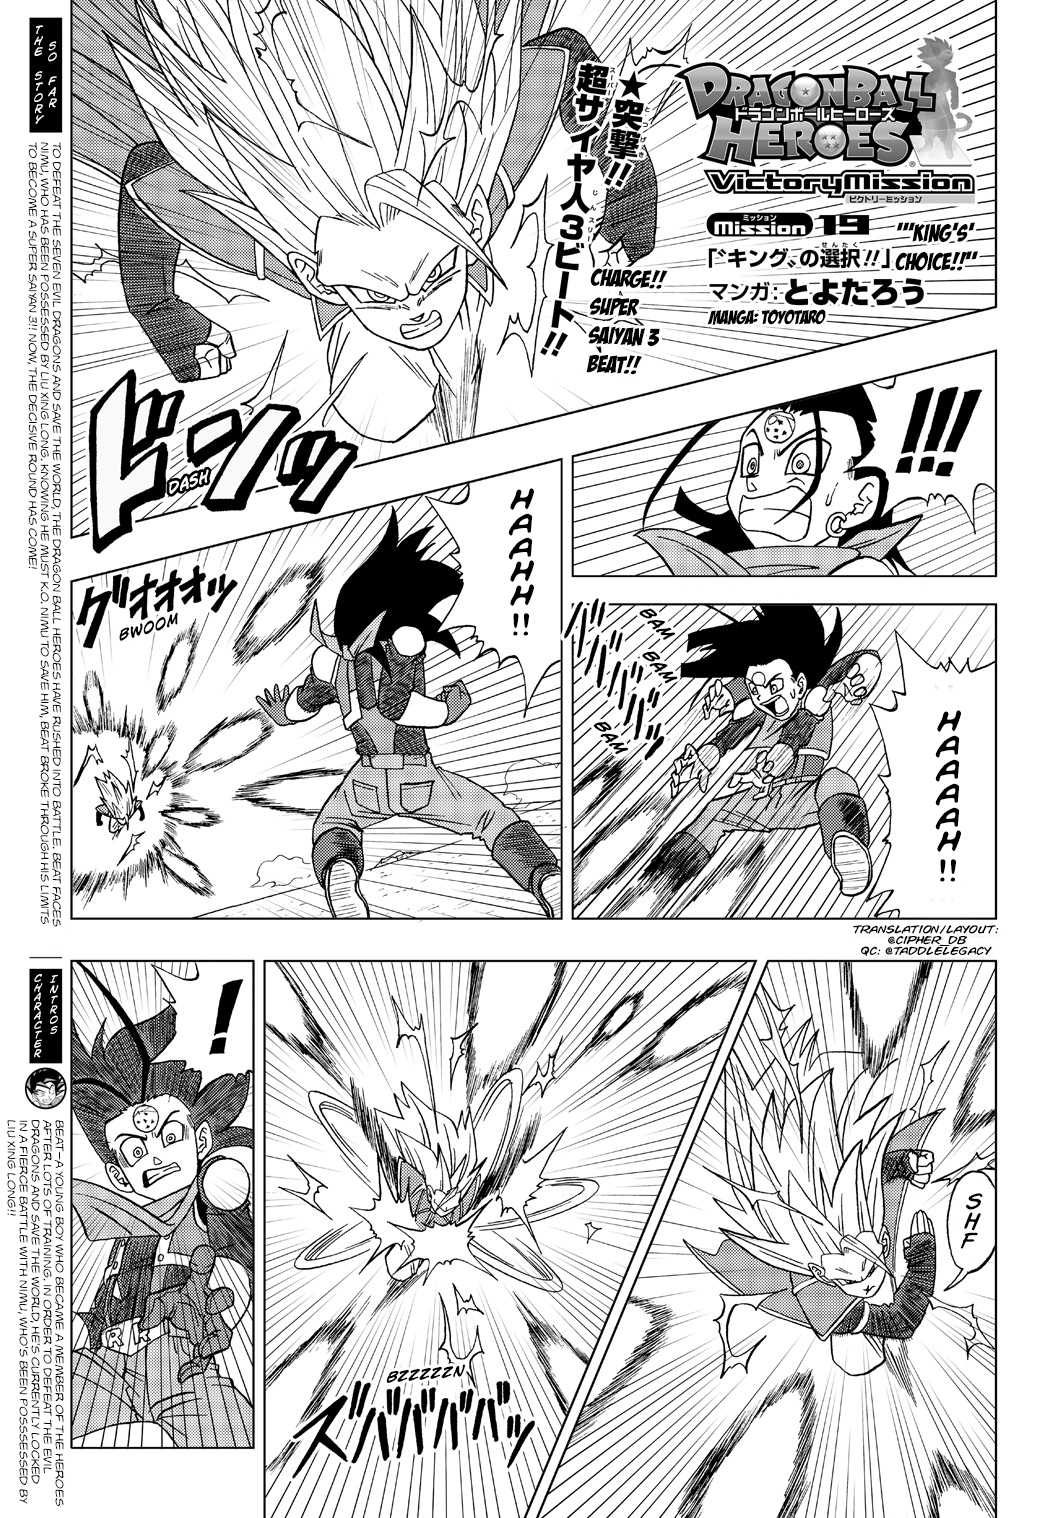 Dragon Ball Heroes - Victory Mission - Page 1